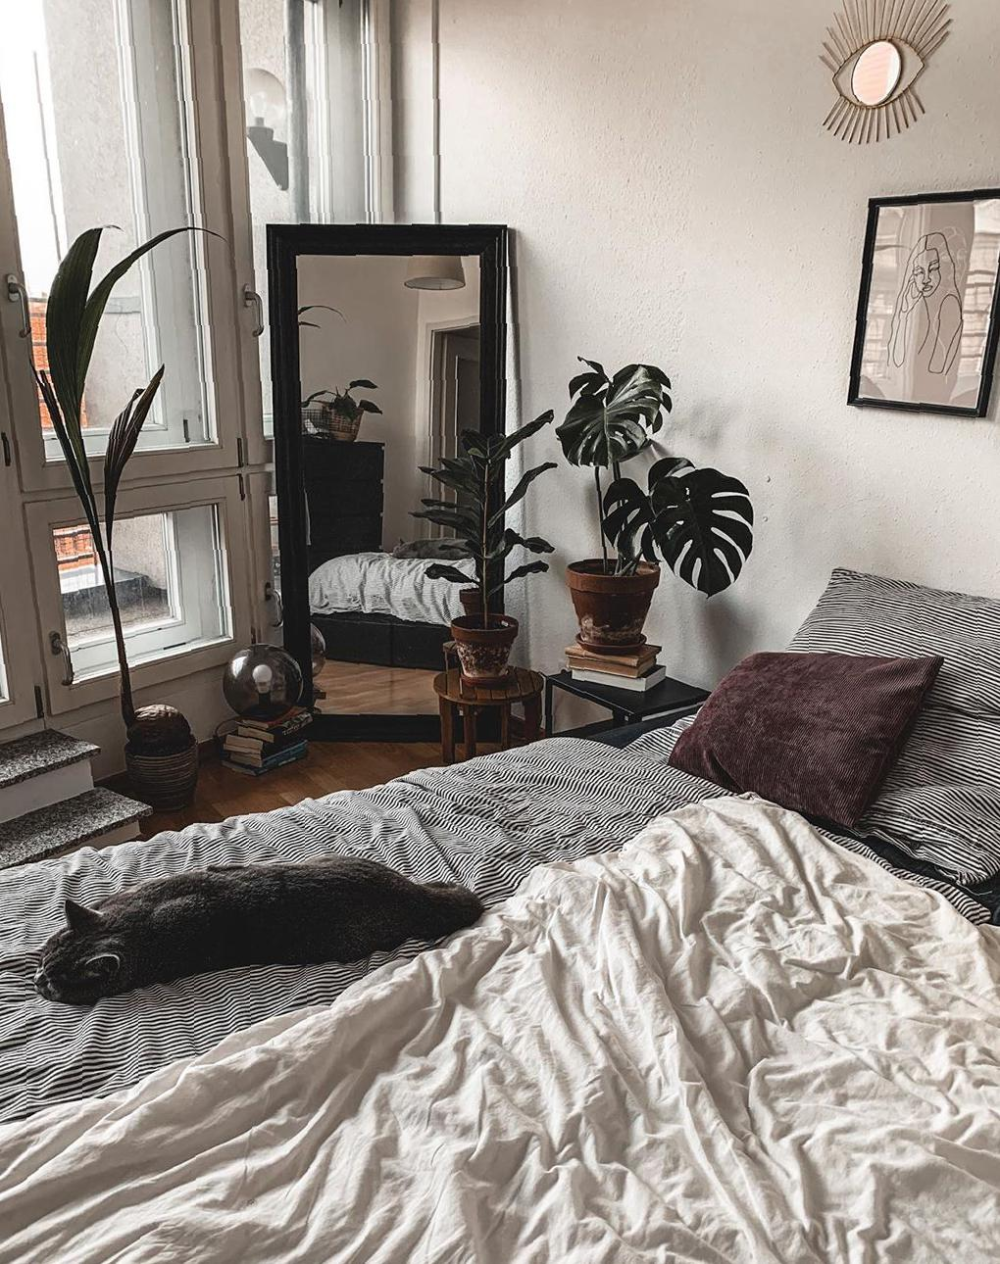 35 Beds that Make Your Bedroom More Comfortable